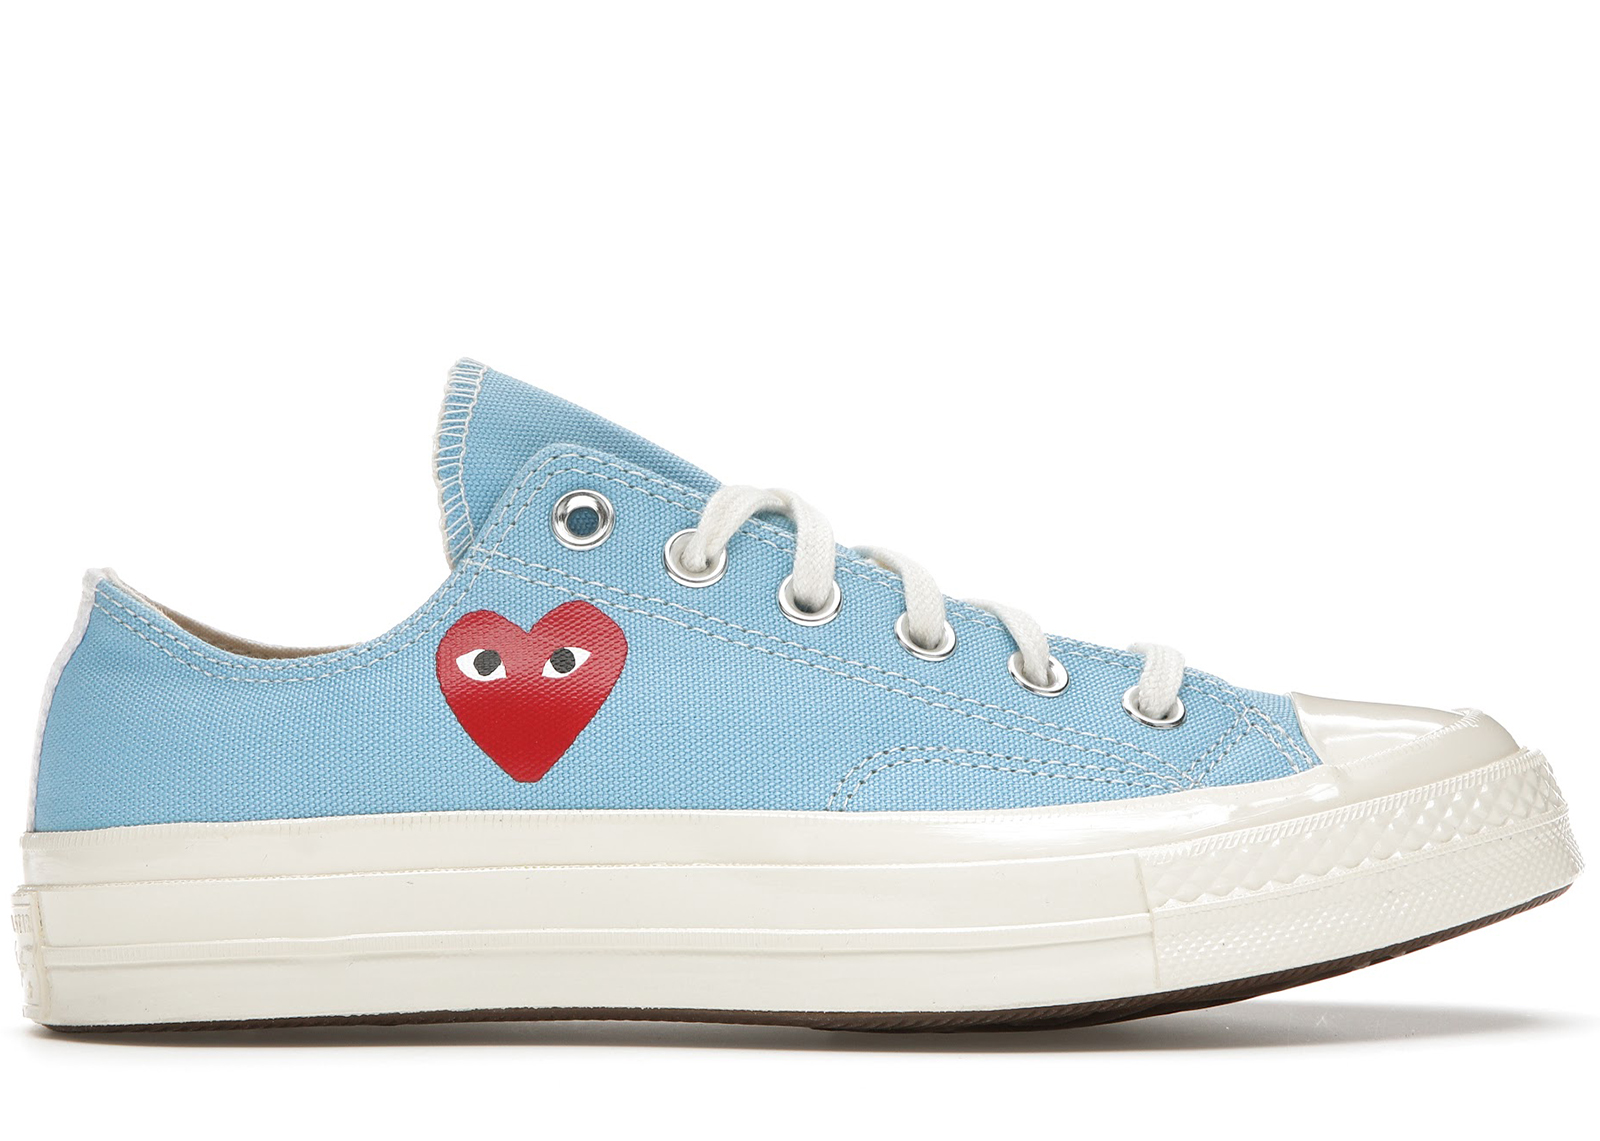 Converse Chuck Taylor All Star 70 Ox Comme des Garcons PLAY Bright Blue